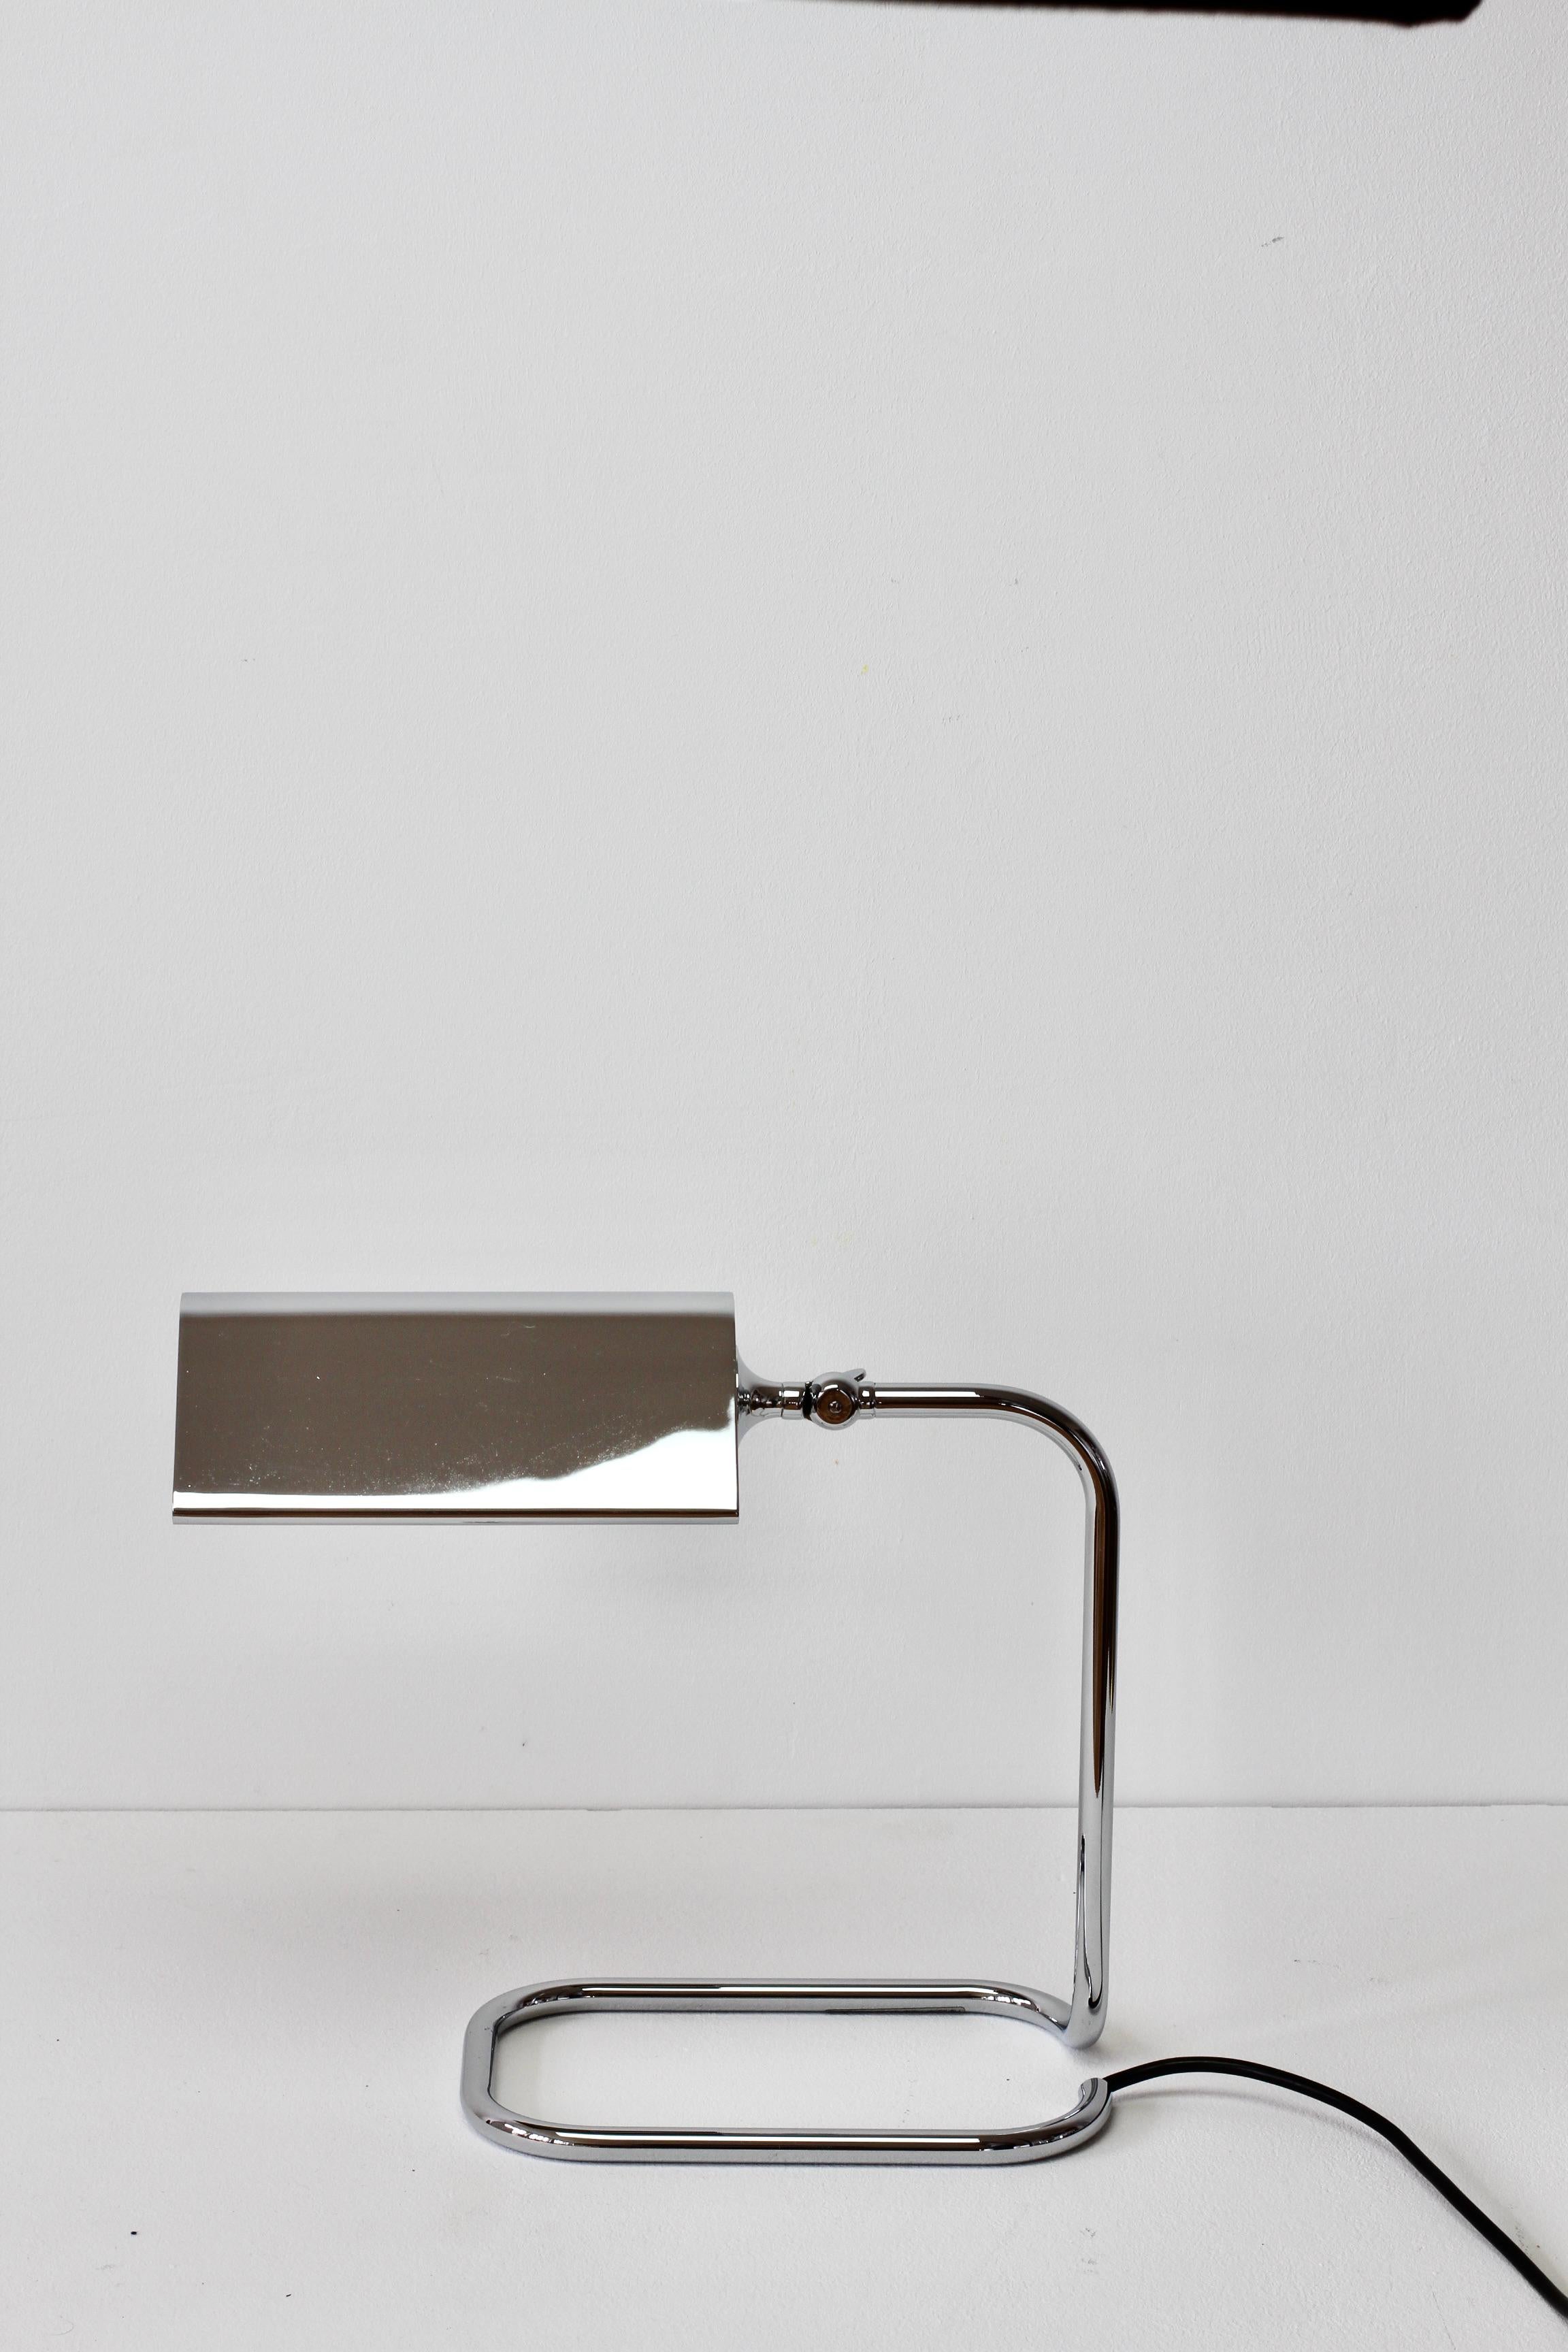 Wonderful Mid-Century Modern vintage German table lamp or desk lamp model 'Cervantes' designed by Florian Schulz in the 1970s. This lamp was made circa 1990s and was produced by Reim Interline. Featuring lacquered polished chrome with adjustable